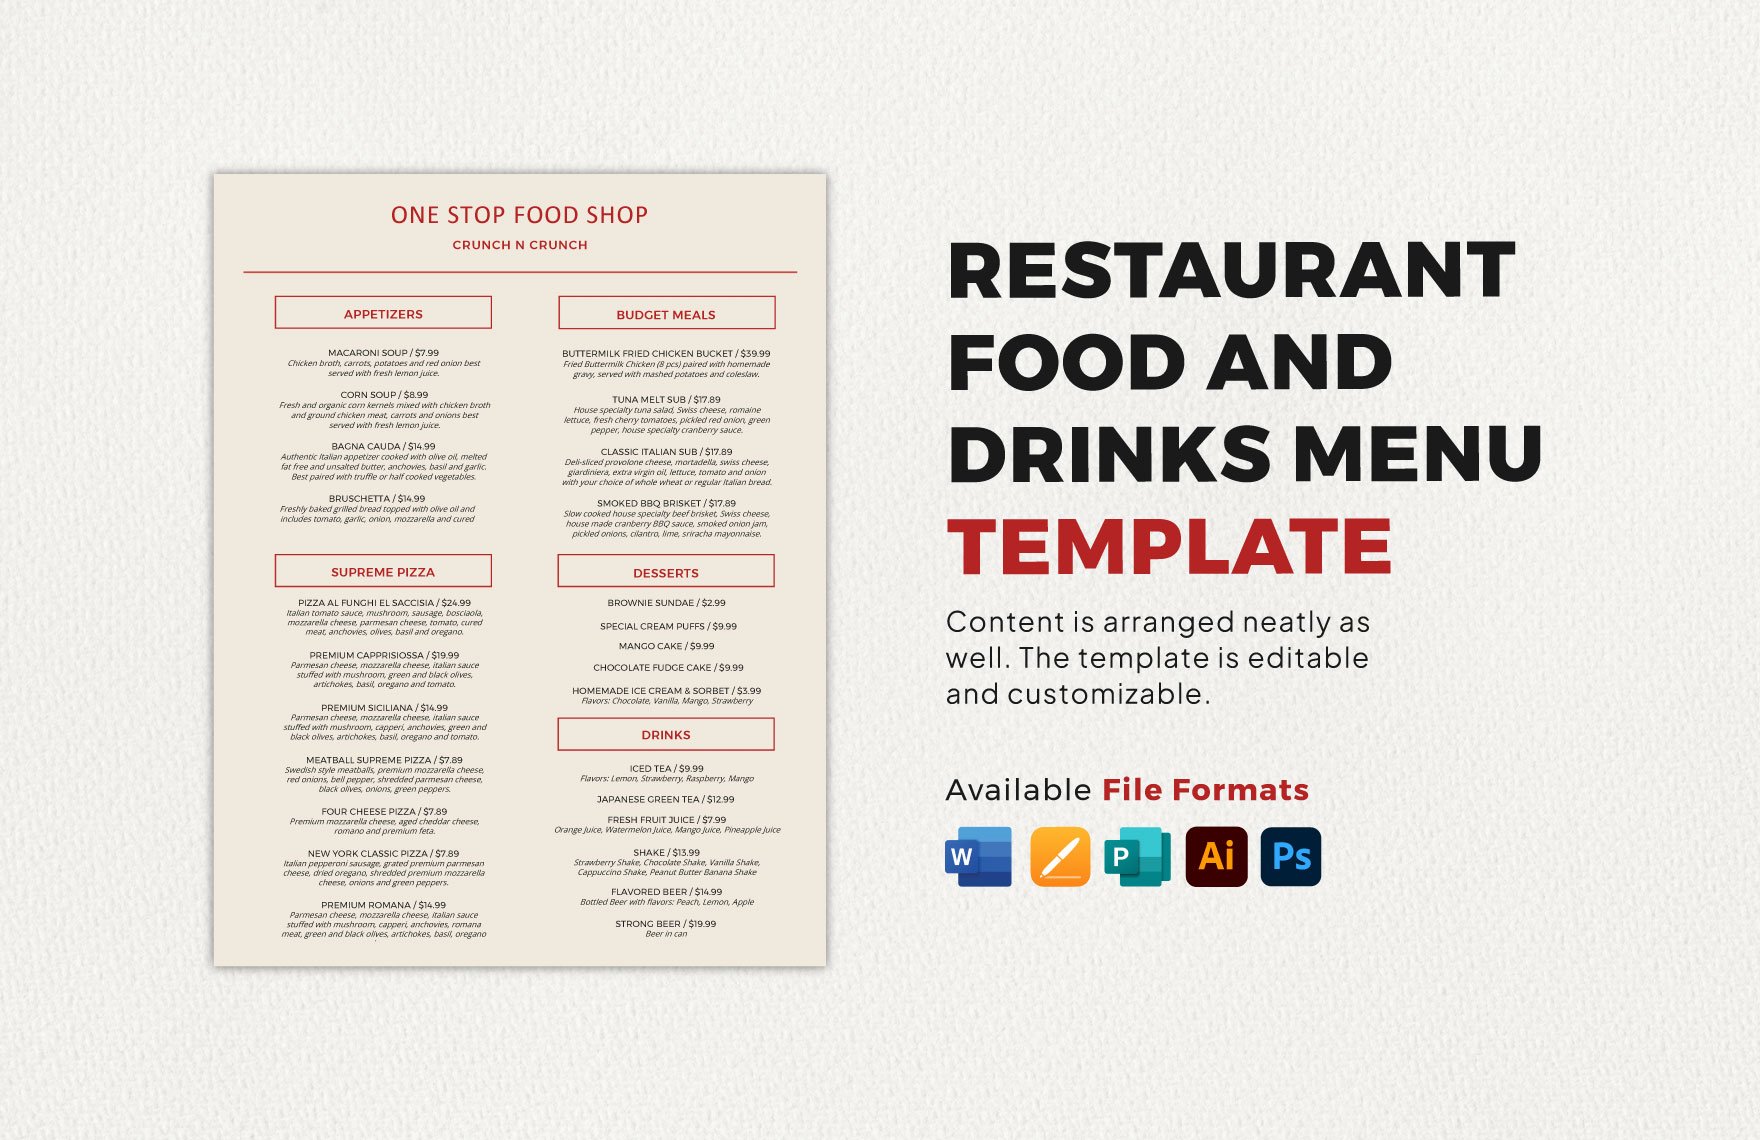 Restaurant Food and Drinks Menu Template in Word, Illustrator, PSD, Apple Pages, Publisher